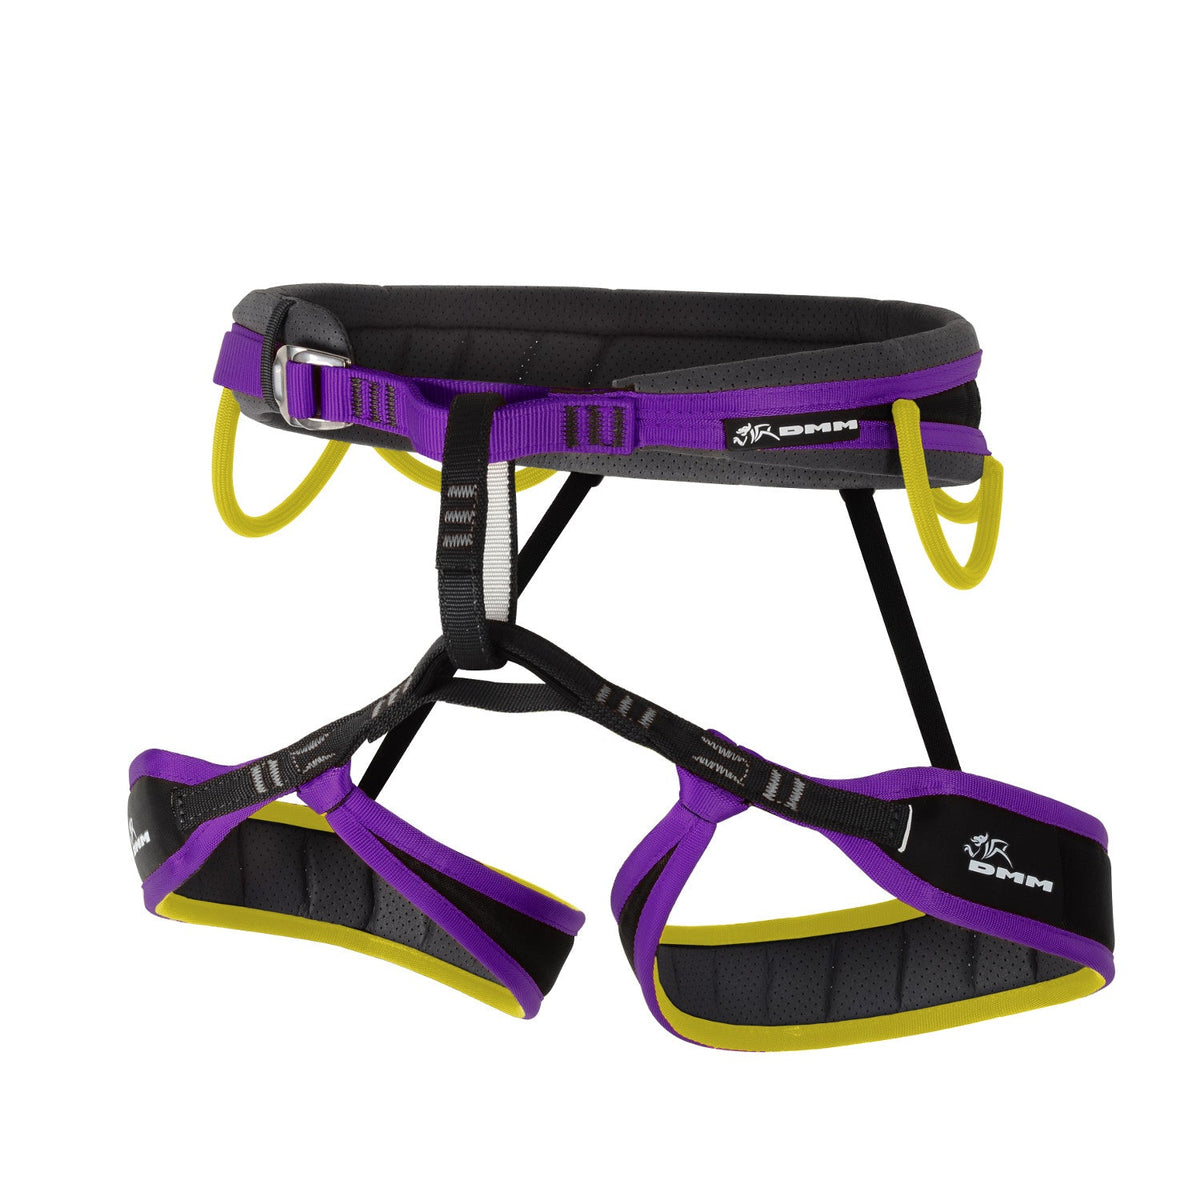 DMM Trance Kids Harness in purple and yellow